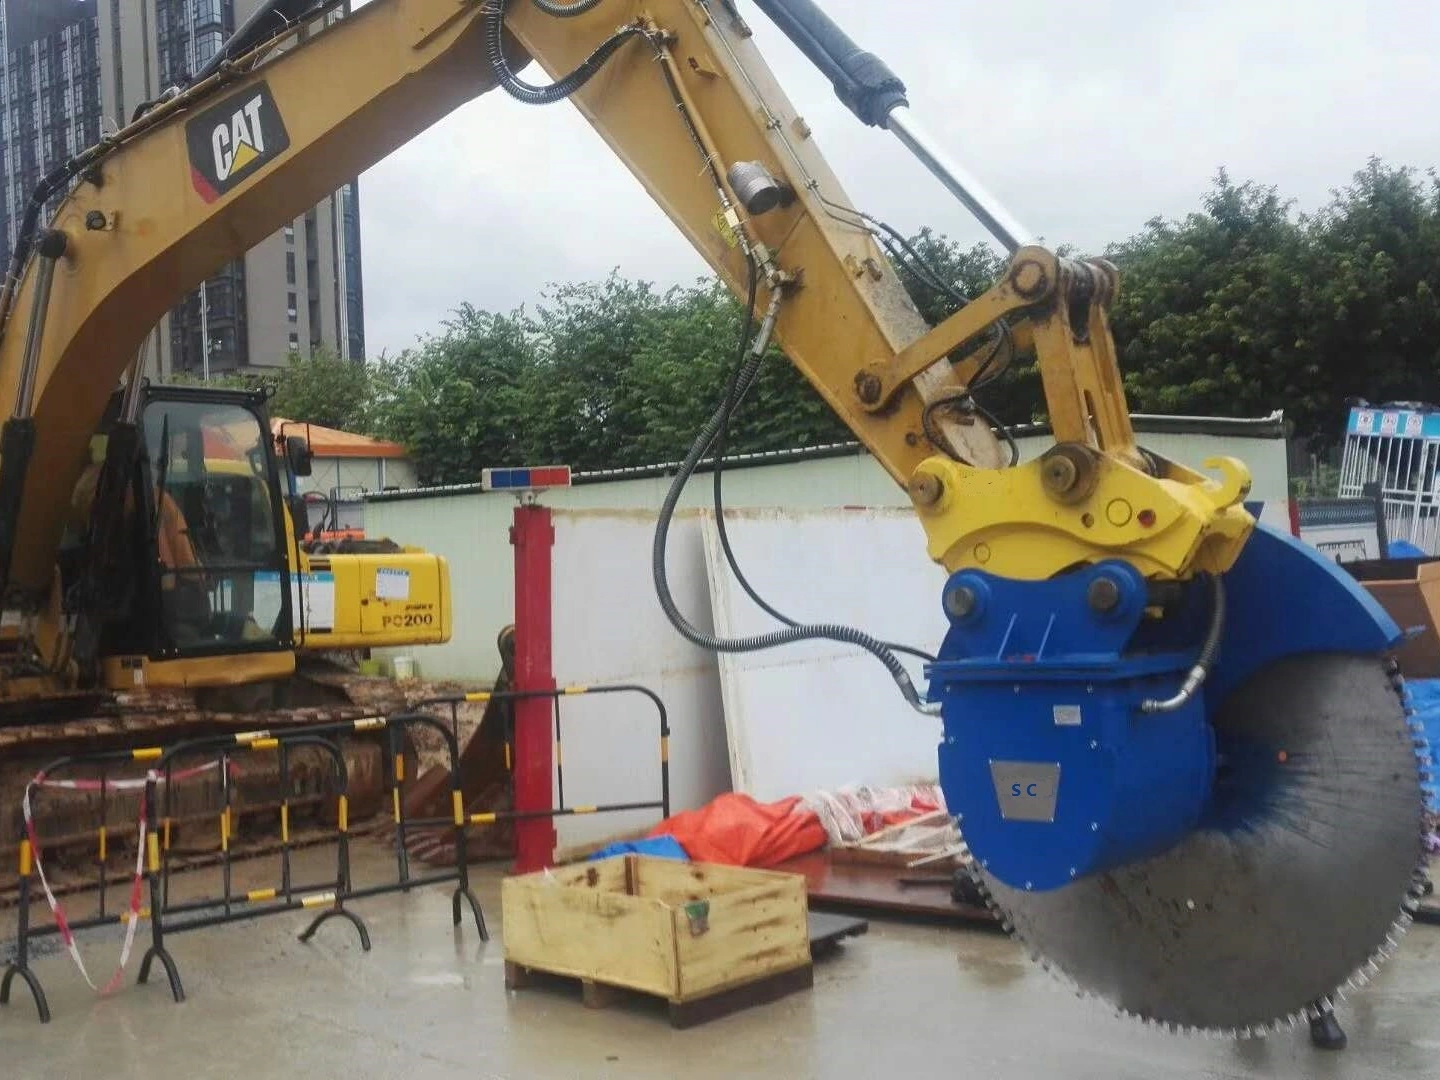 rock saw attachment for excavator